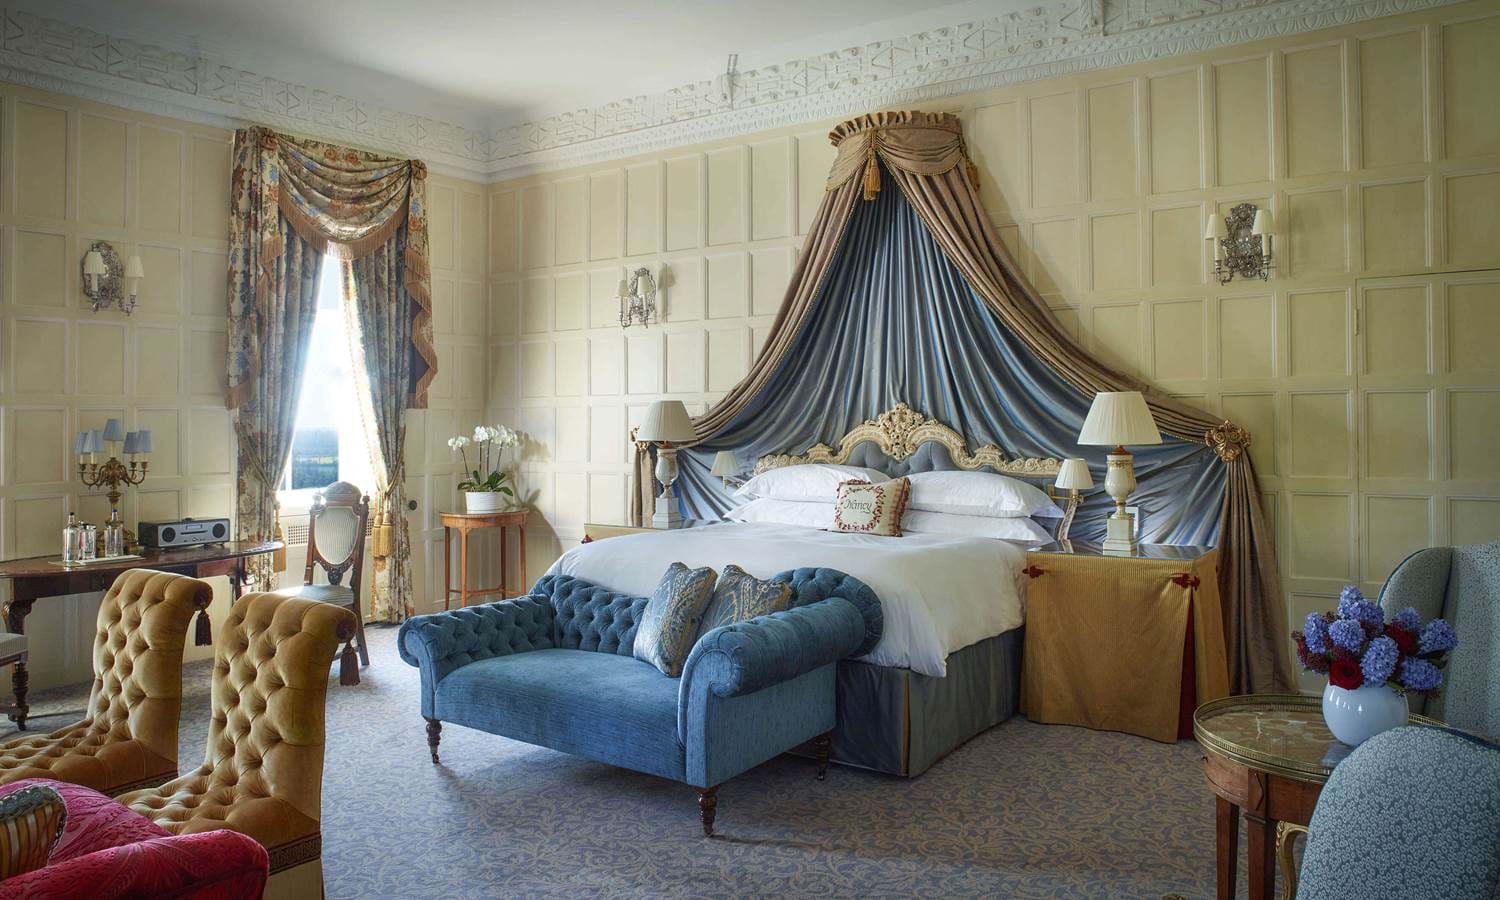 Cliveden House rooms